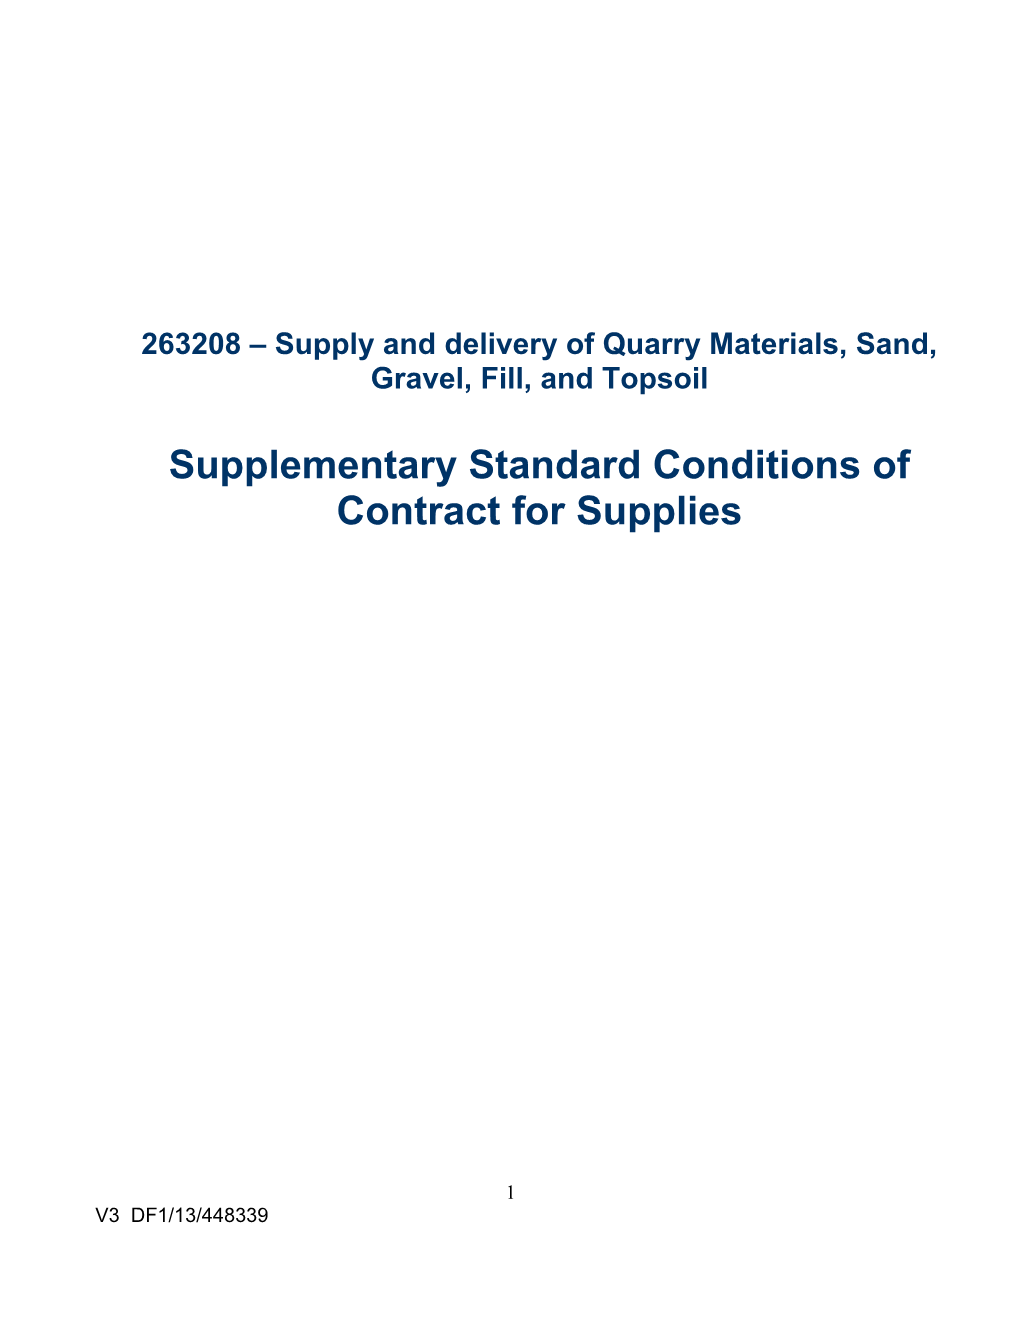 263208 Supply and Delivery of Quarry Materials, Sand, Gravel, Fill, and Topsoil